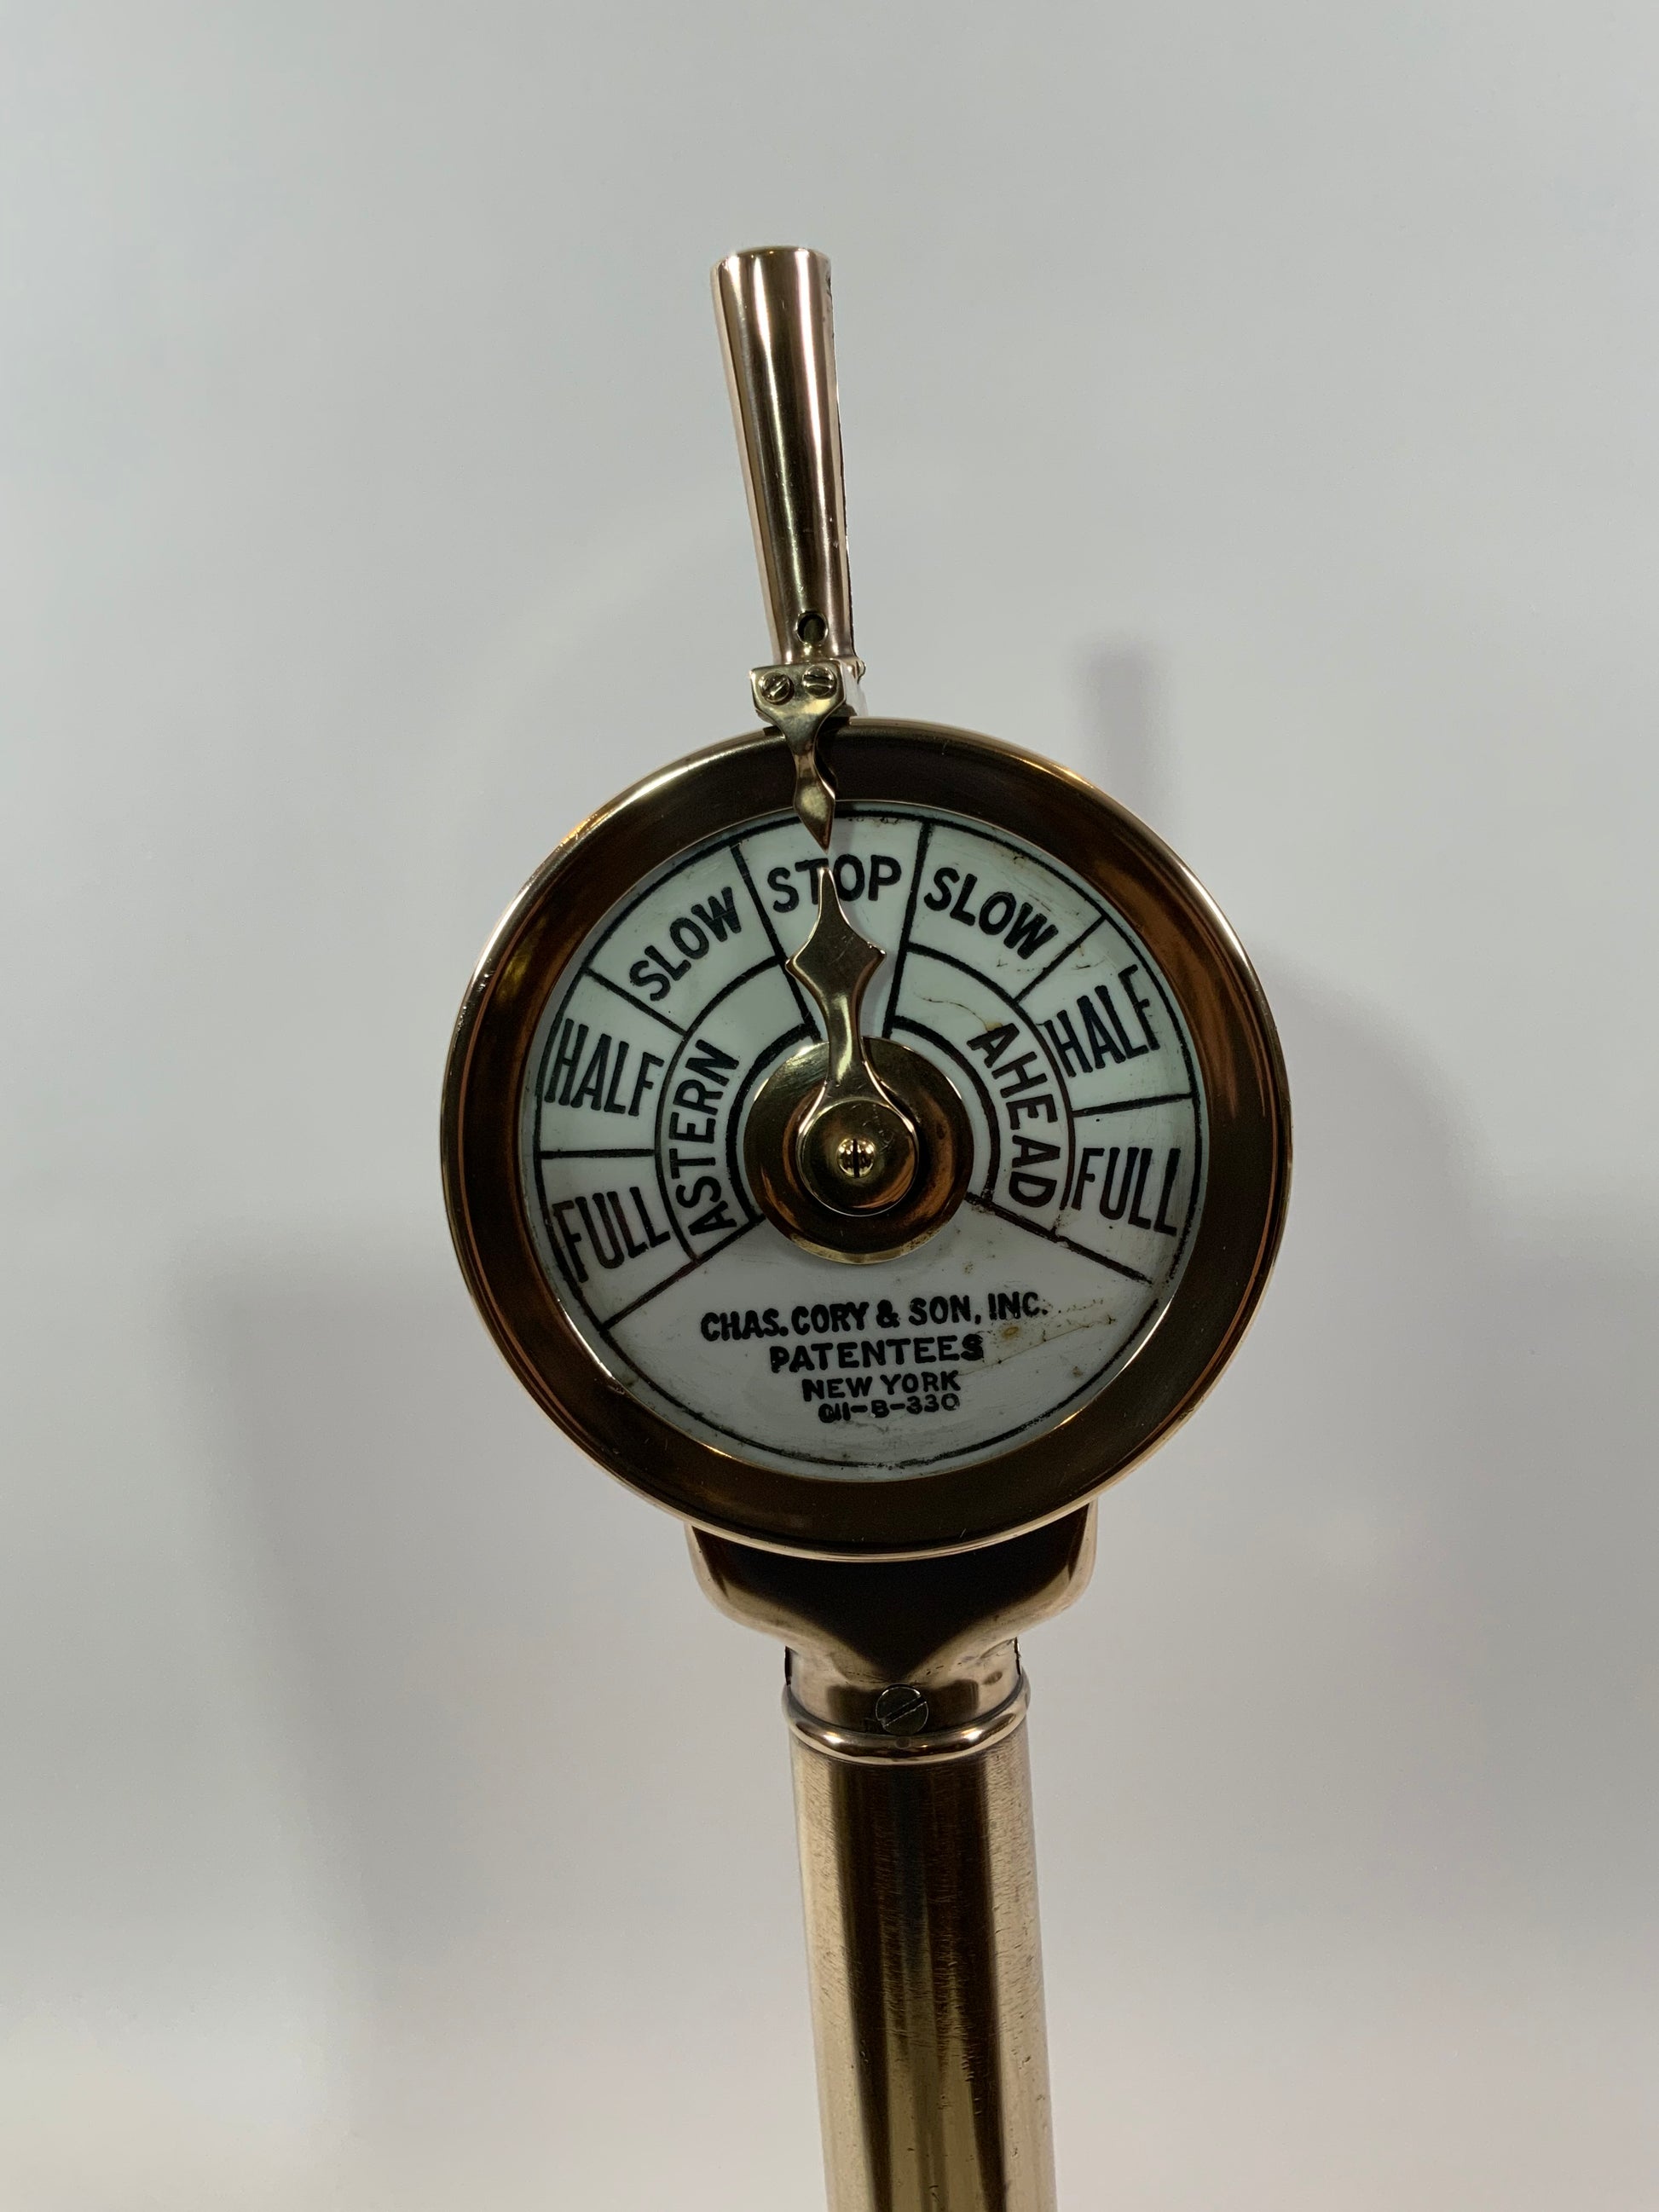 Ship's Engine Order Telegraph by Charles Cory and Son of New York - Lannan Gallery